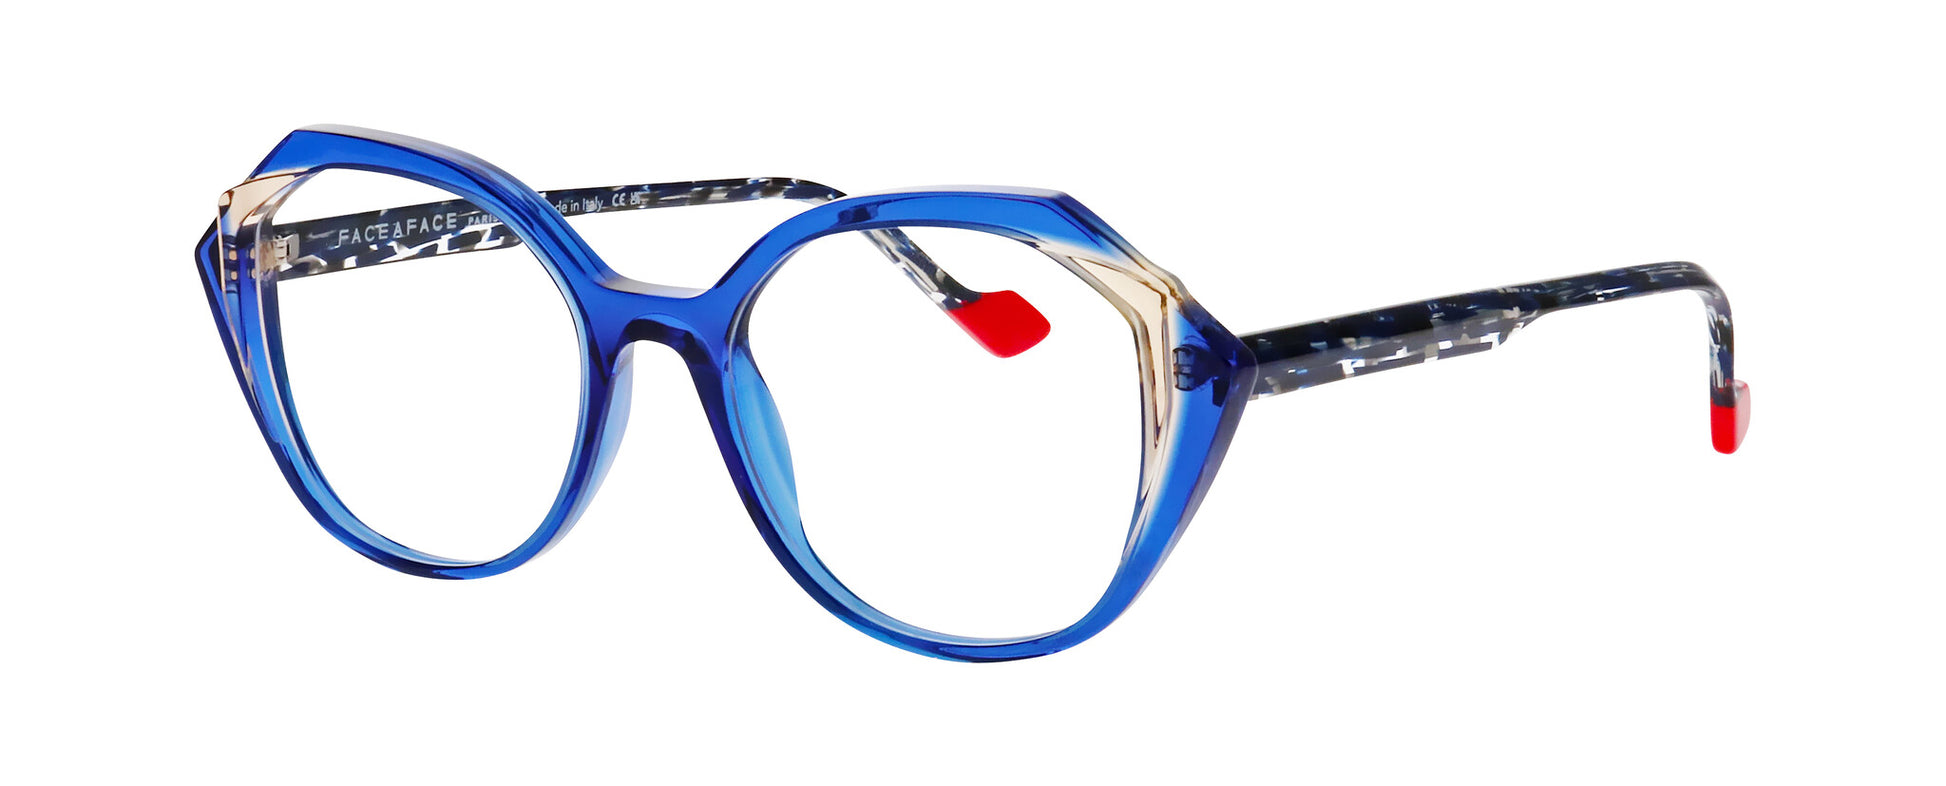 Women's prescription eyewear – A partial side view of an acetate frame that is geometric in shape and ultra blue/transparent in colour.  The blue and white speckled temples are finished with red tips. 